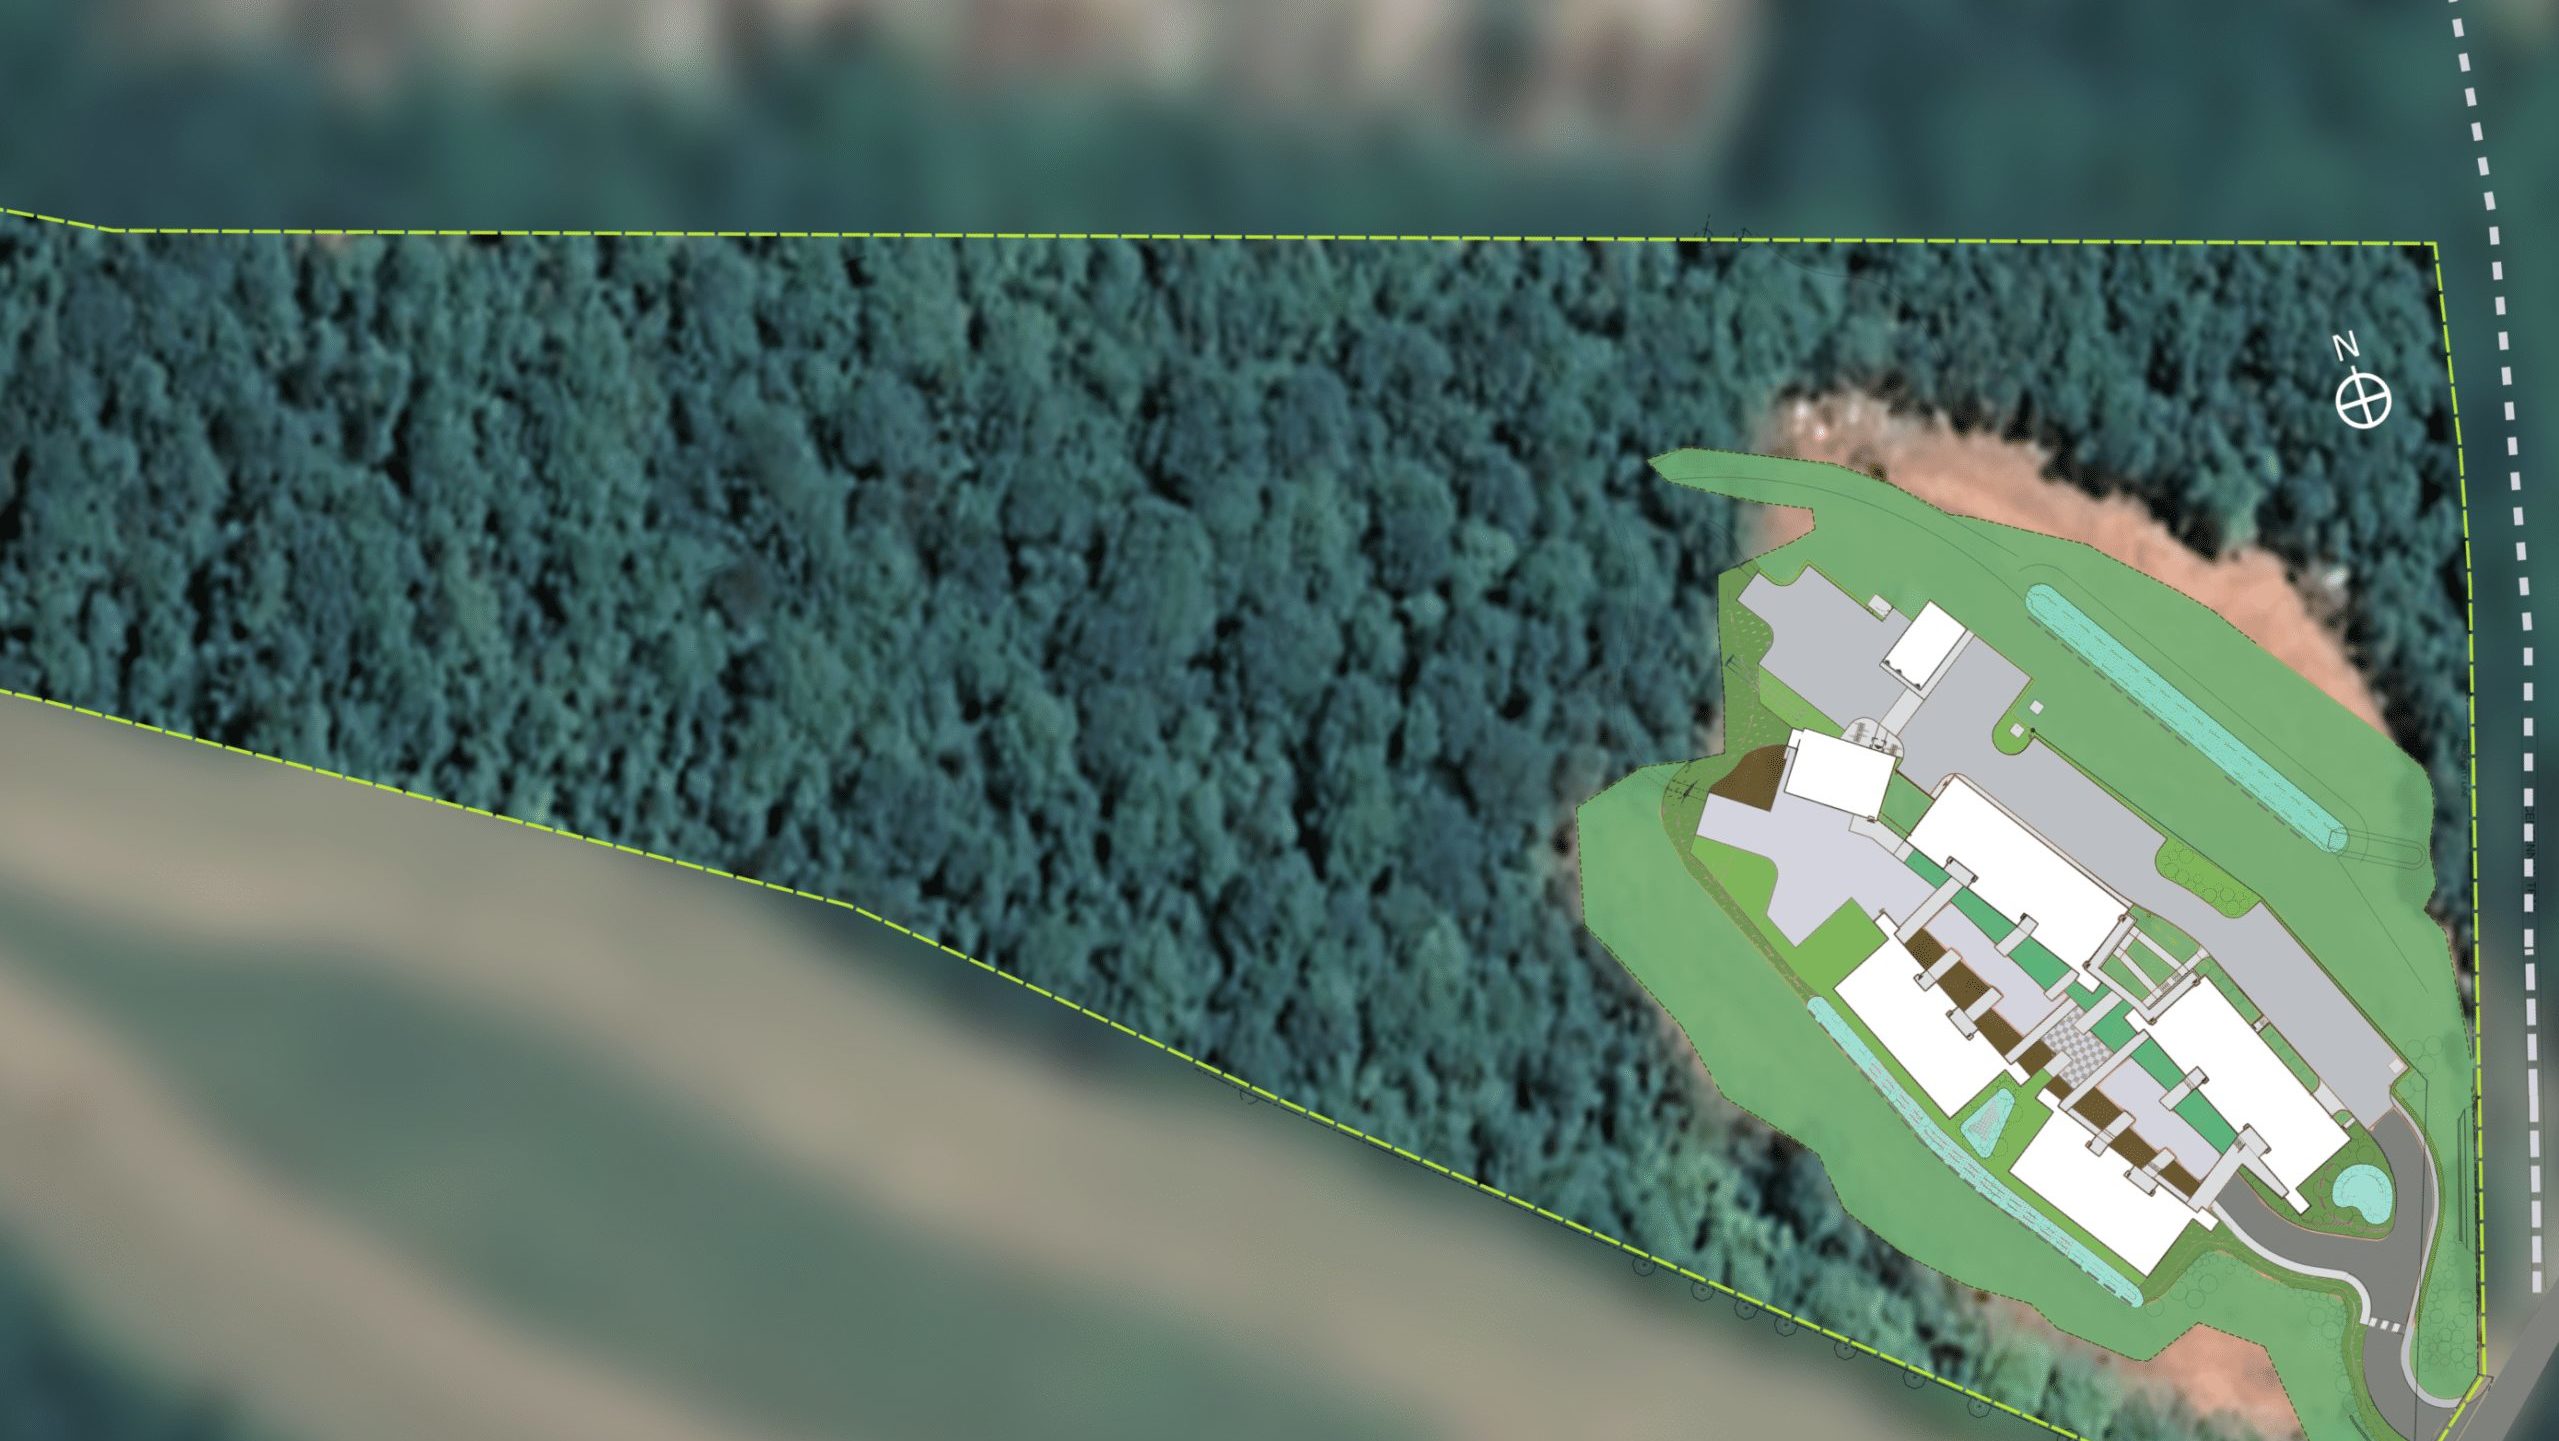 Image of the 15-acre property owned by Treehouse Village. It shows the community built on a few acres and over 10 acres of undisturbed forest which makes for a great backyard playground for the whole family.